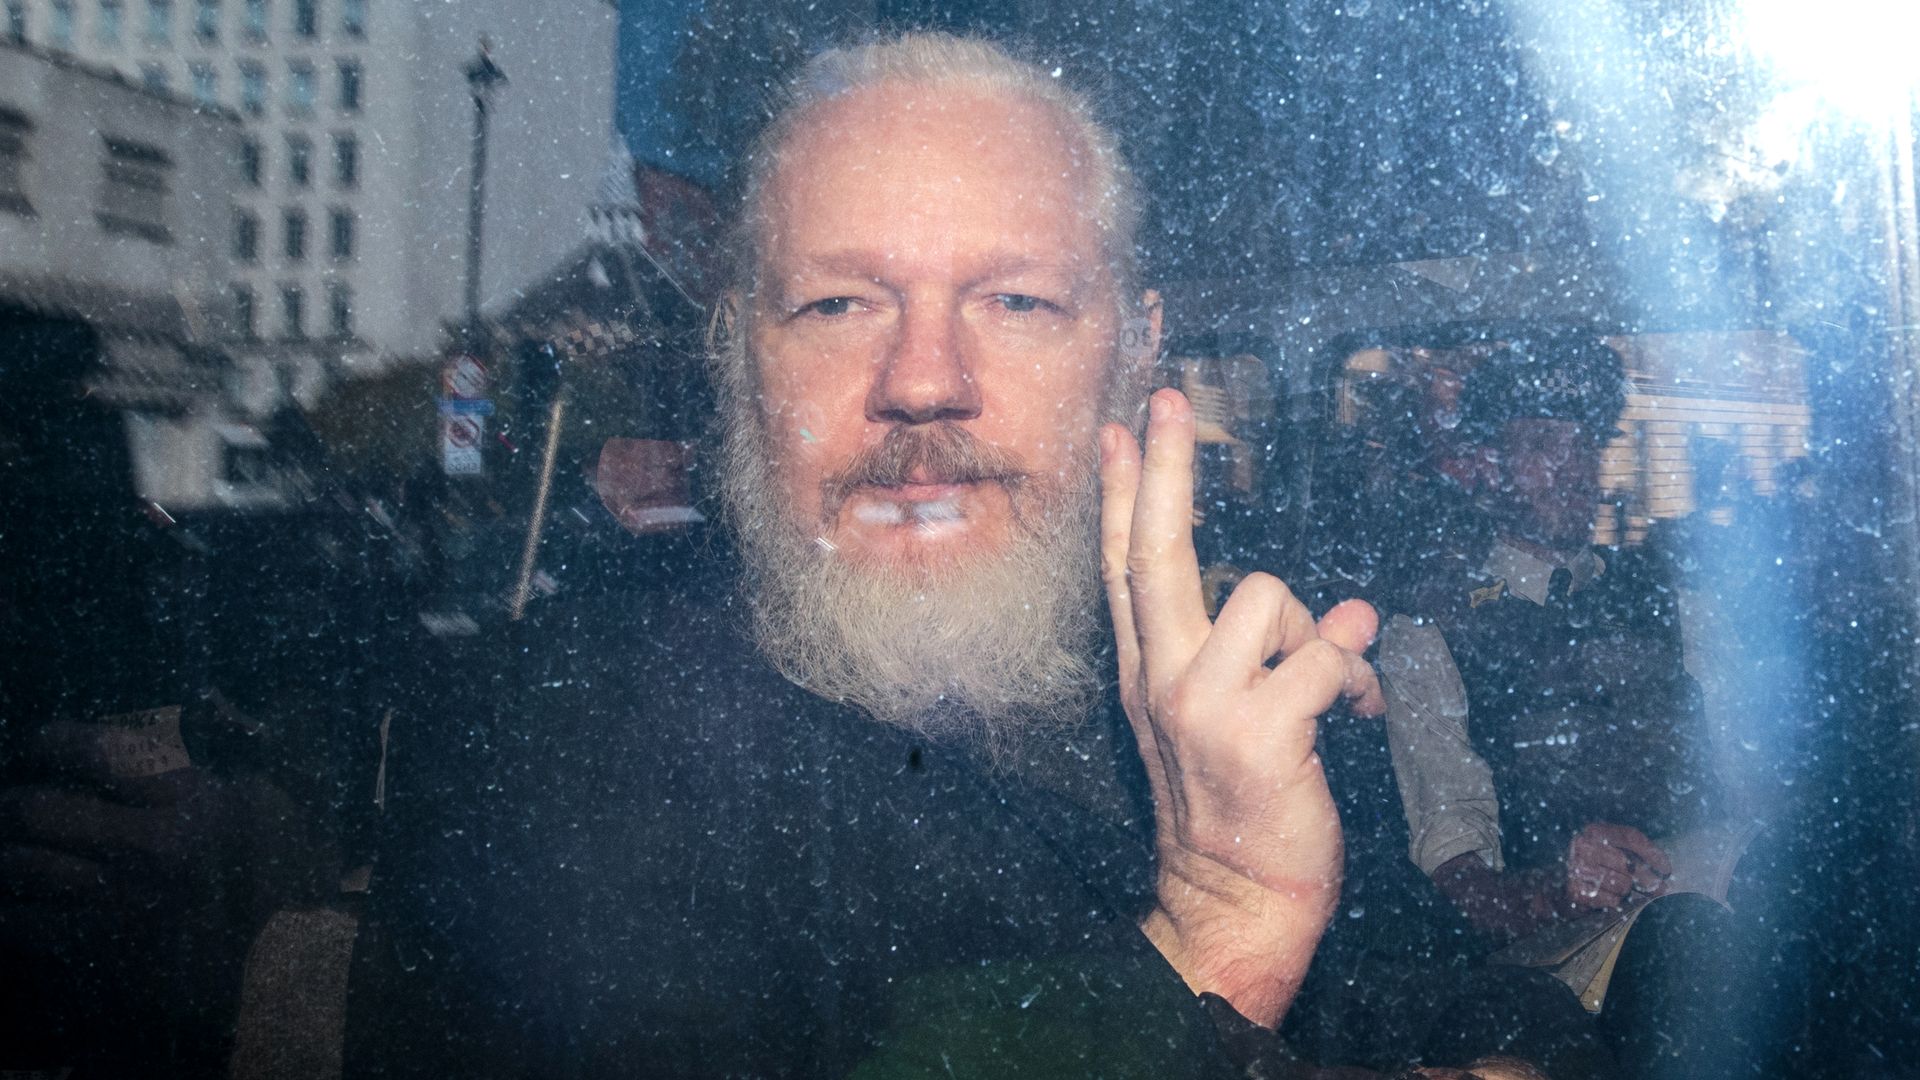 Assange makes a peace sign at the camera in this image.